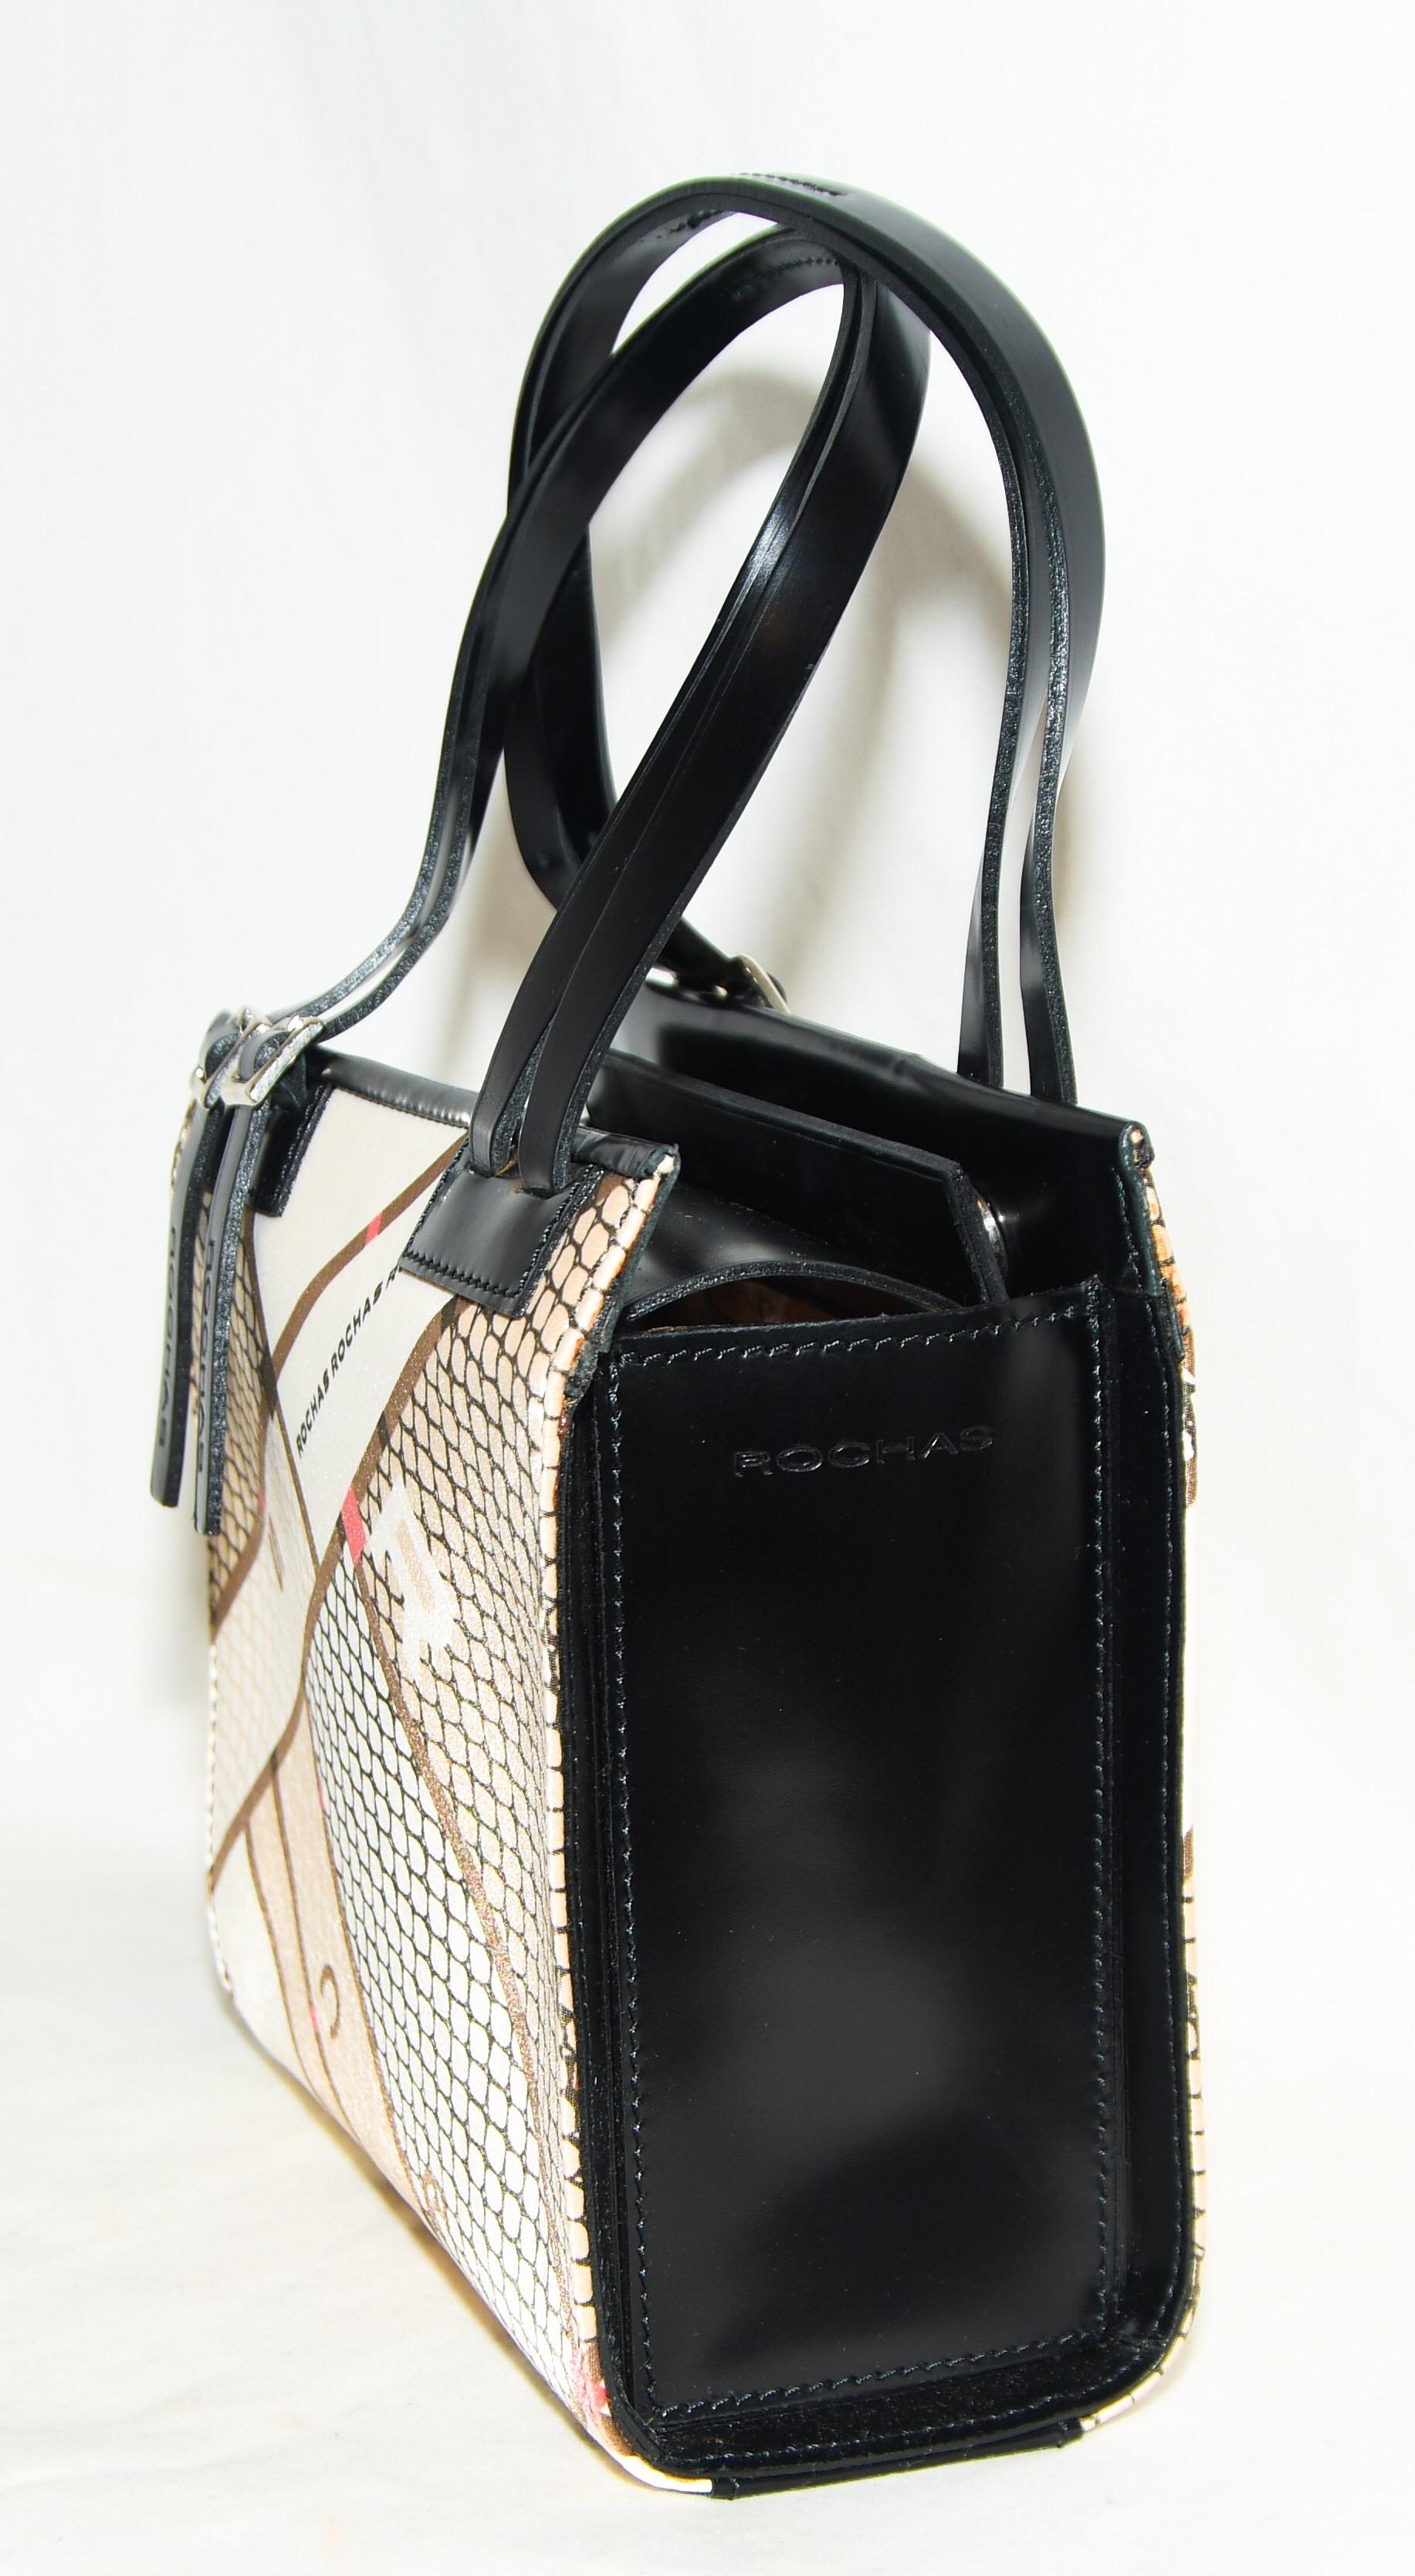 Rochas black leather bag incorporates 2 handles on each side of structured top handle bag with buckles on each strap.  Bag opens at top of bag with 2 snaps for closure.  The interior is lined in beige logo jacquard and includes one side zippered